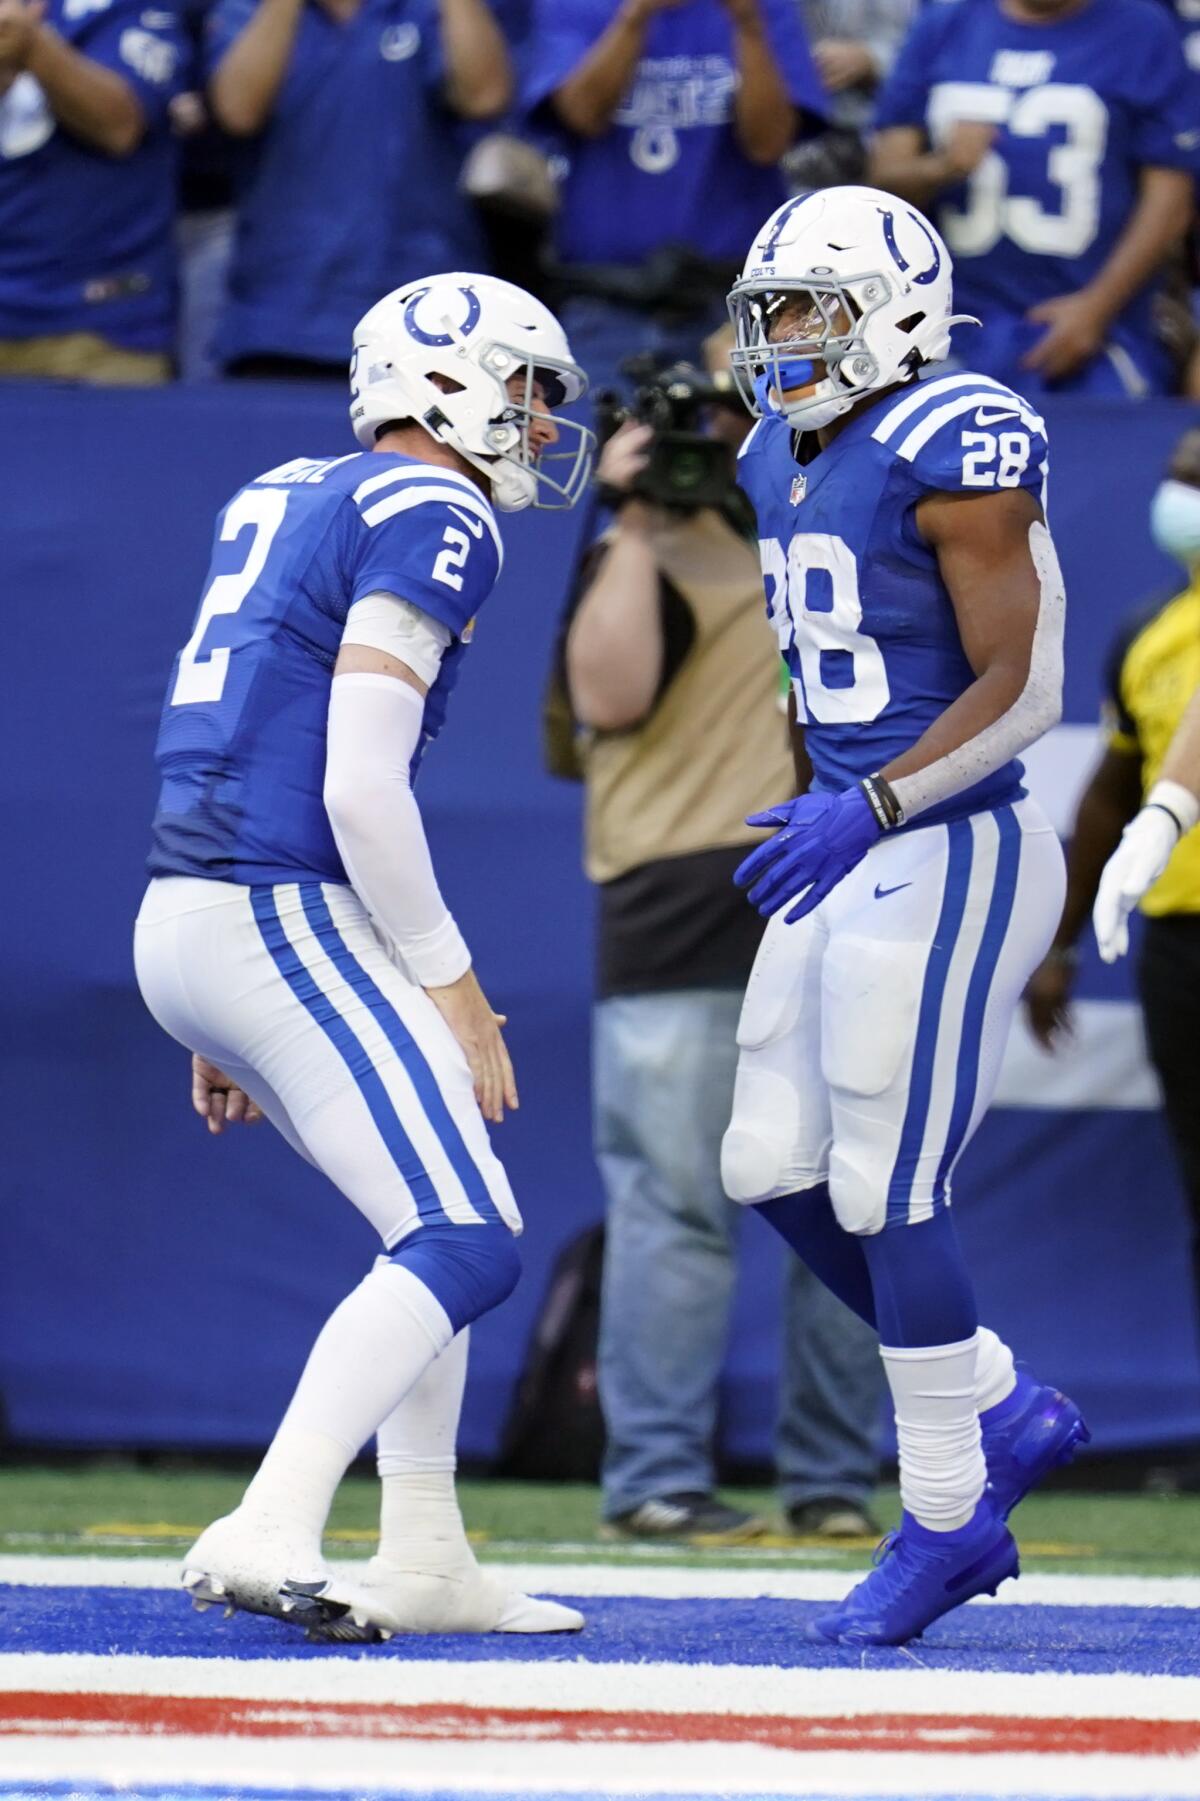 Indianapolis Colts' Jonathan Taylor (28) celebrates a rushing touchdown with quarterback Carson Wentz (2) during the second half of an NFL football game against the Houston Texans, Sunday, Oct. 17, 2021, in Indianapolis. (AP Photo/Michael Conroy)